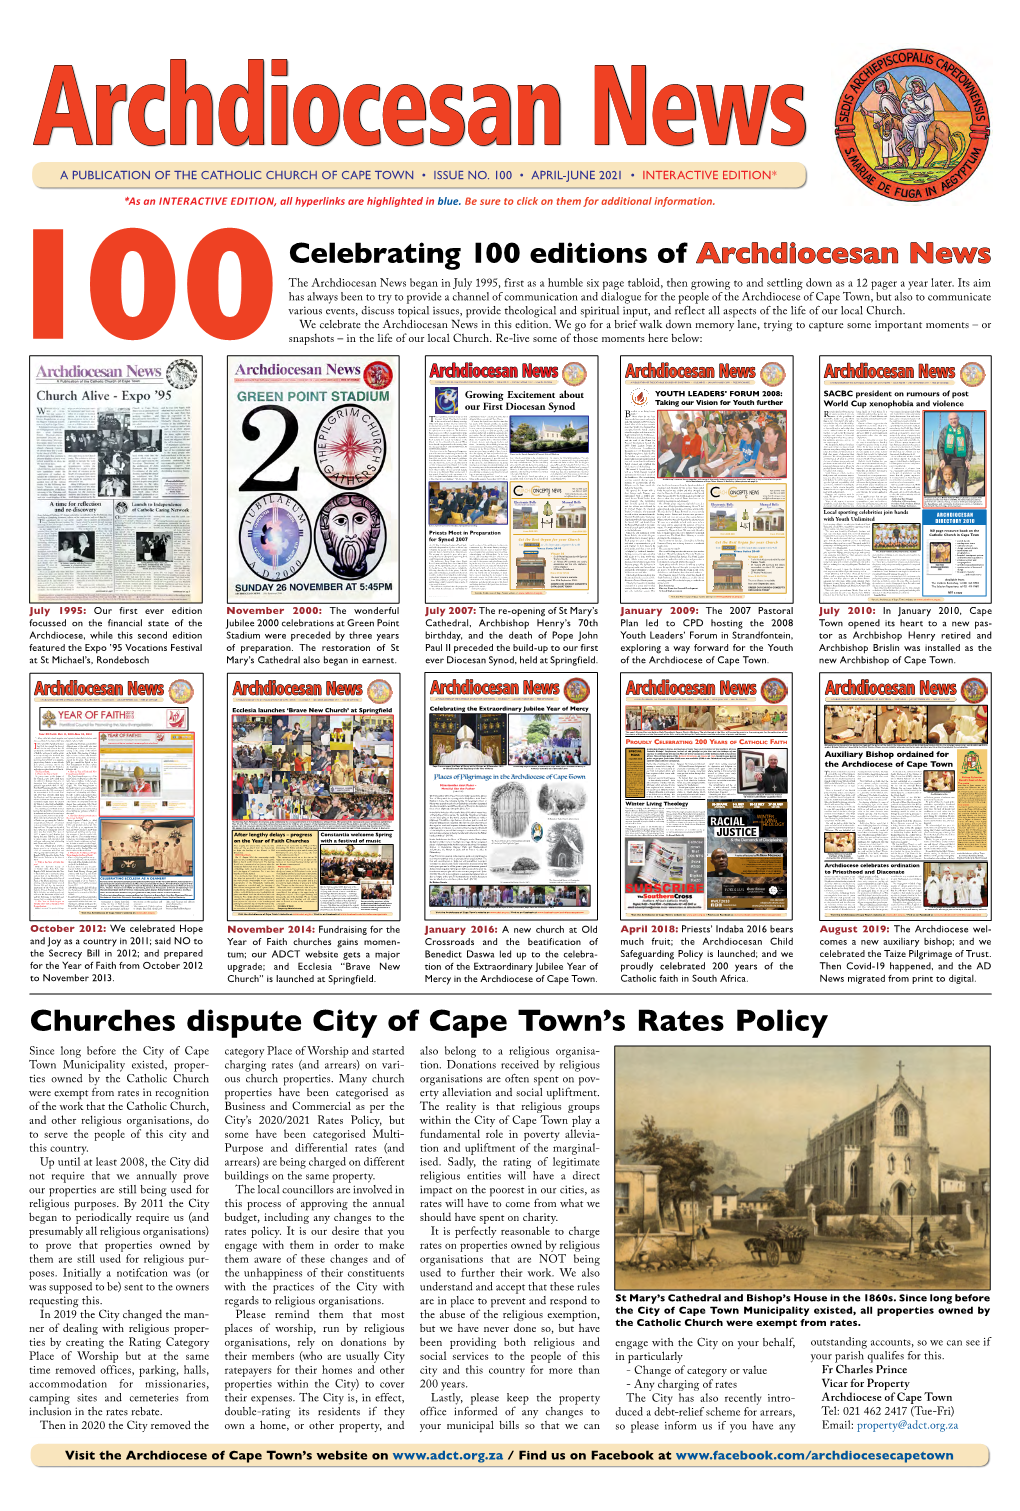 Churches Dispute City of Cape Town's Rates Policy